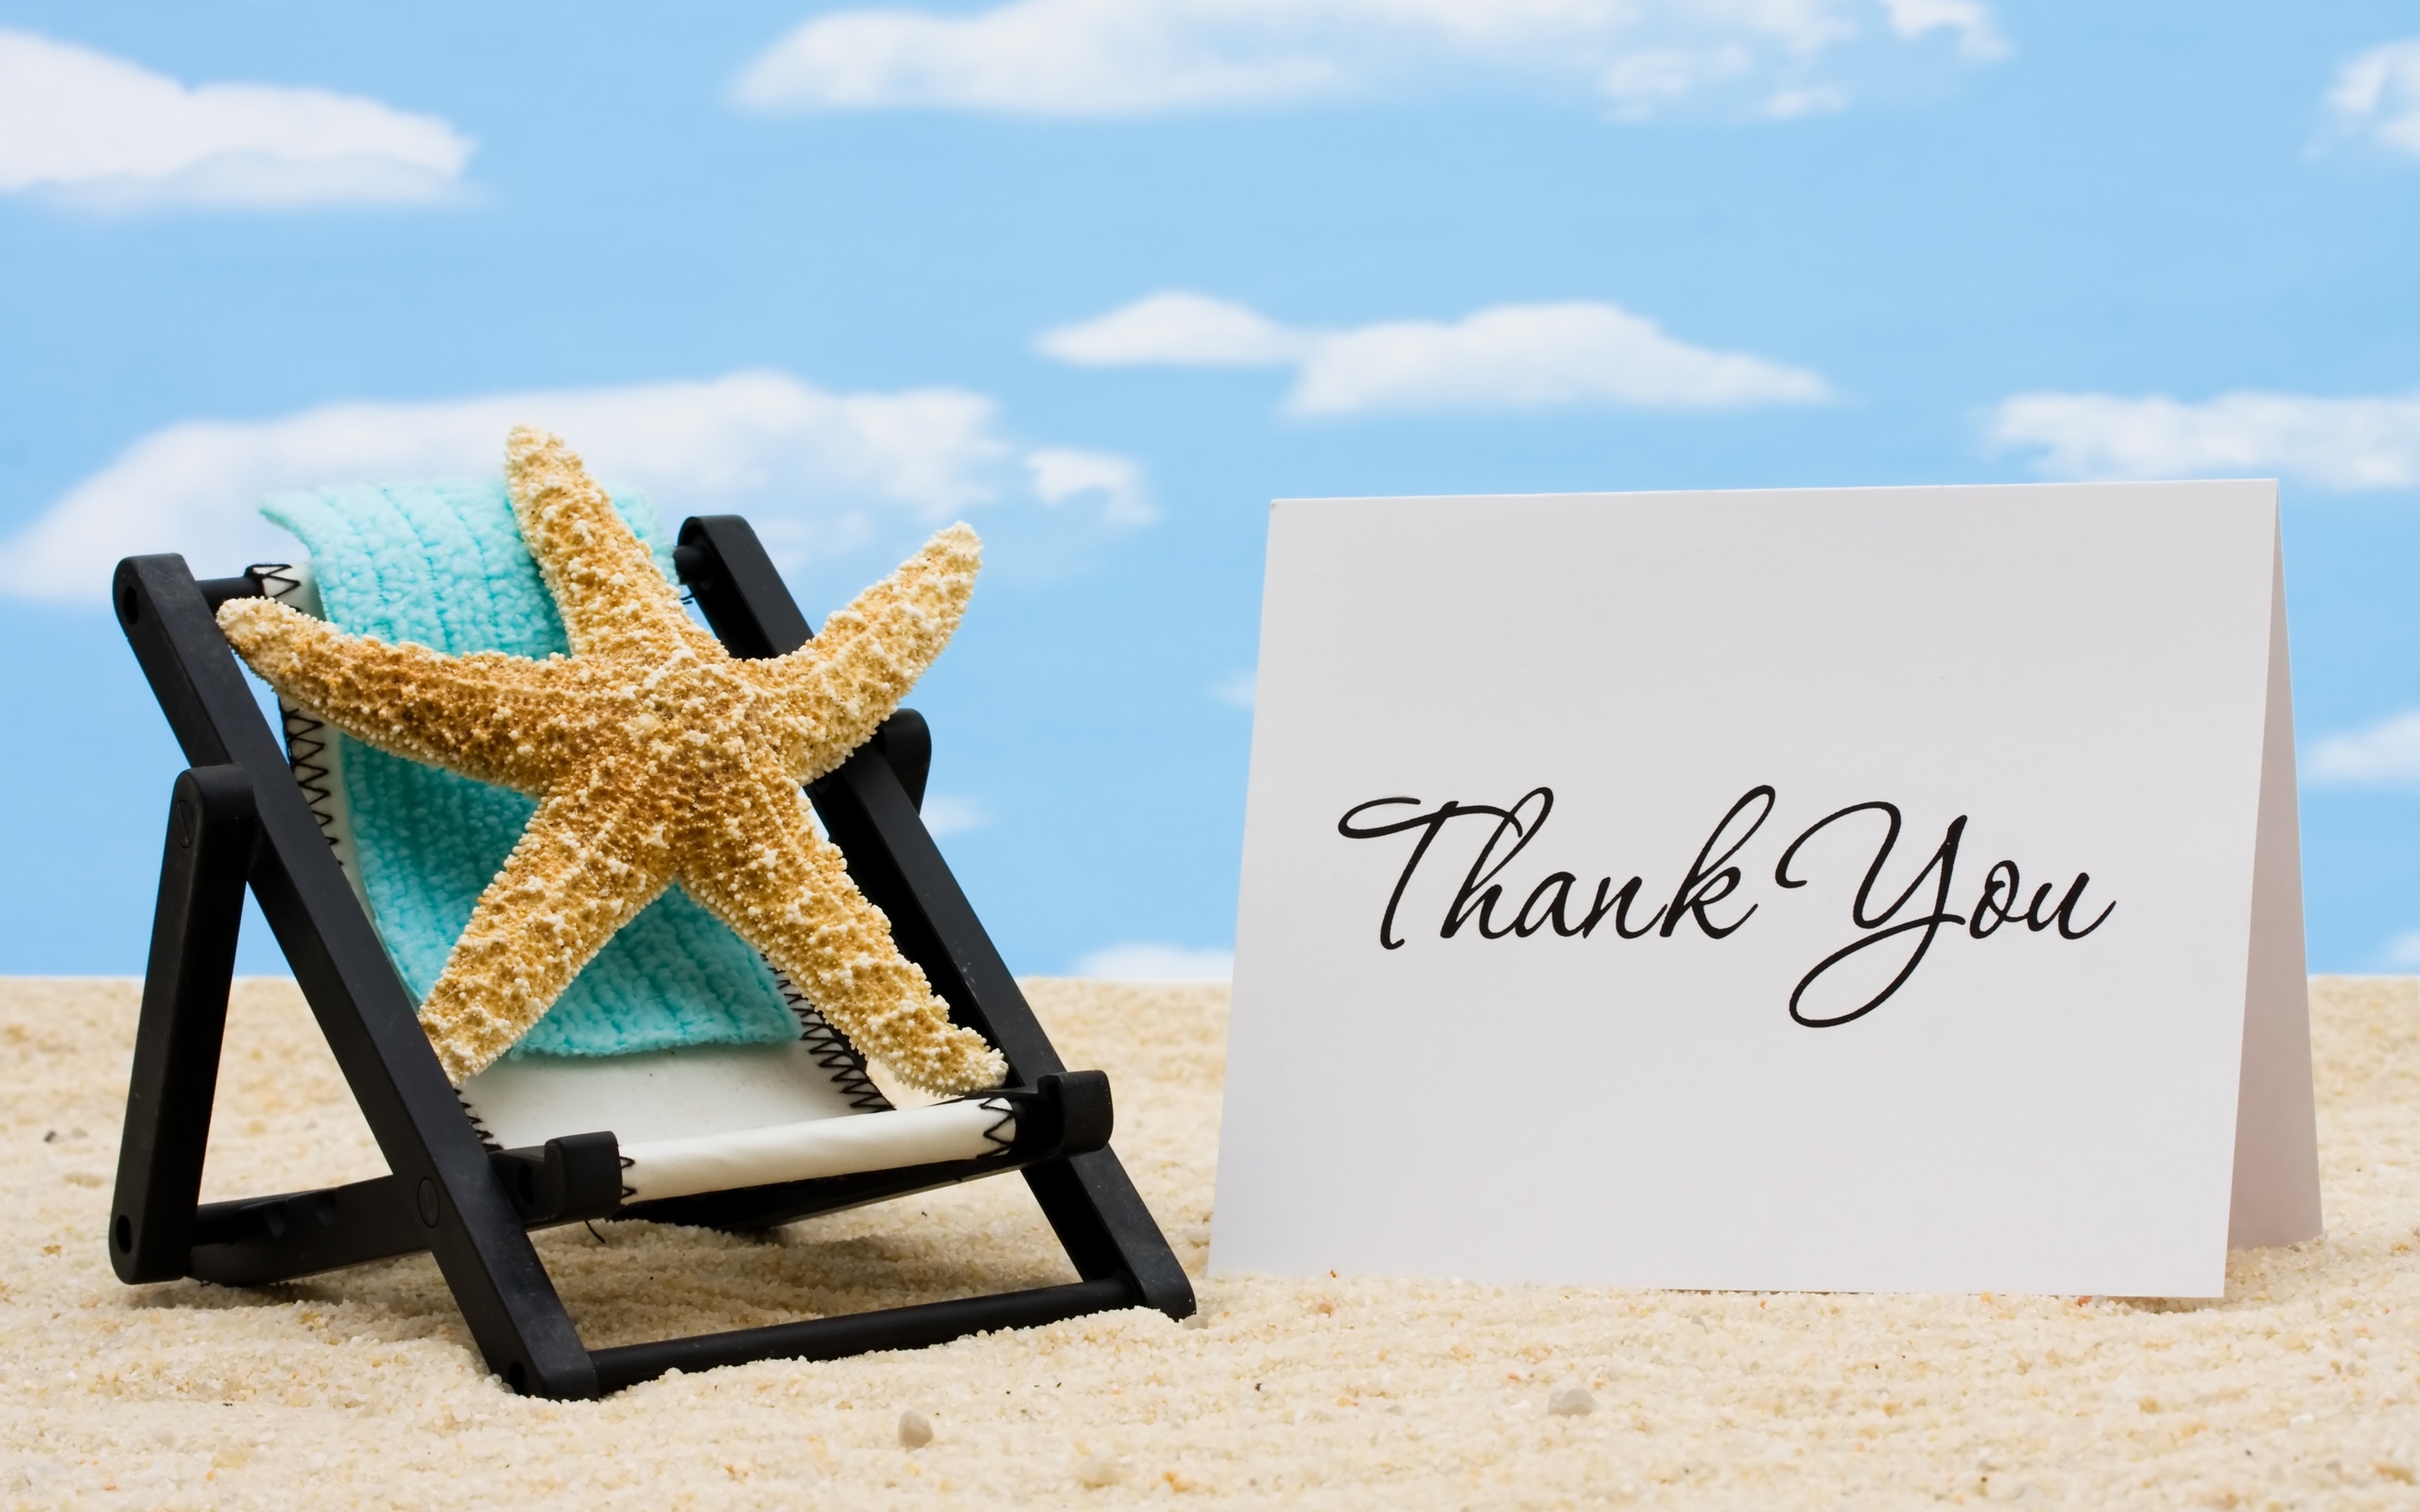 Thank You Summer Wallpaper And Image Pictures Photos